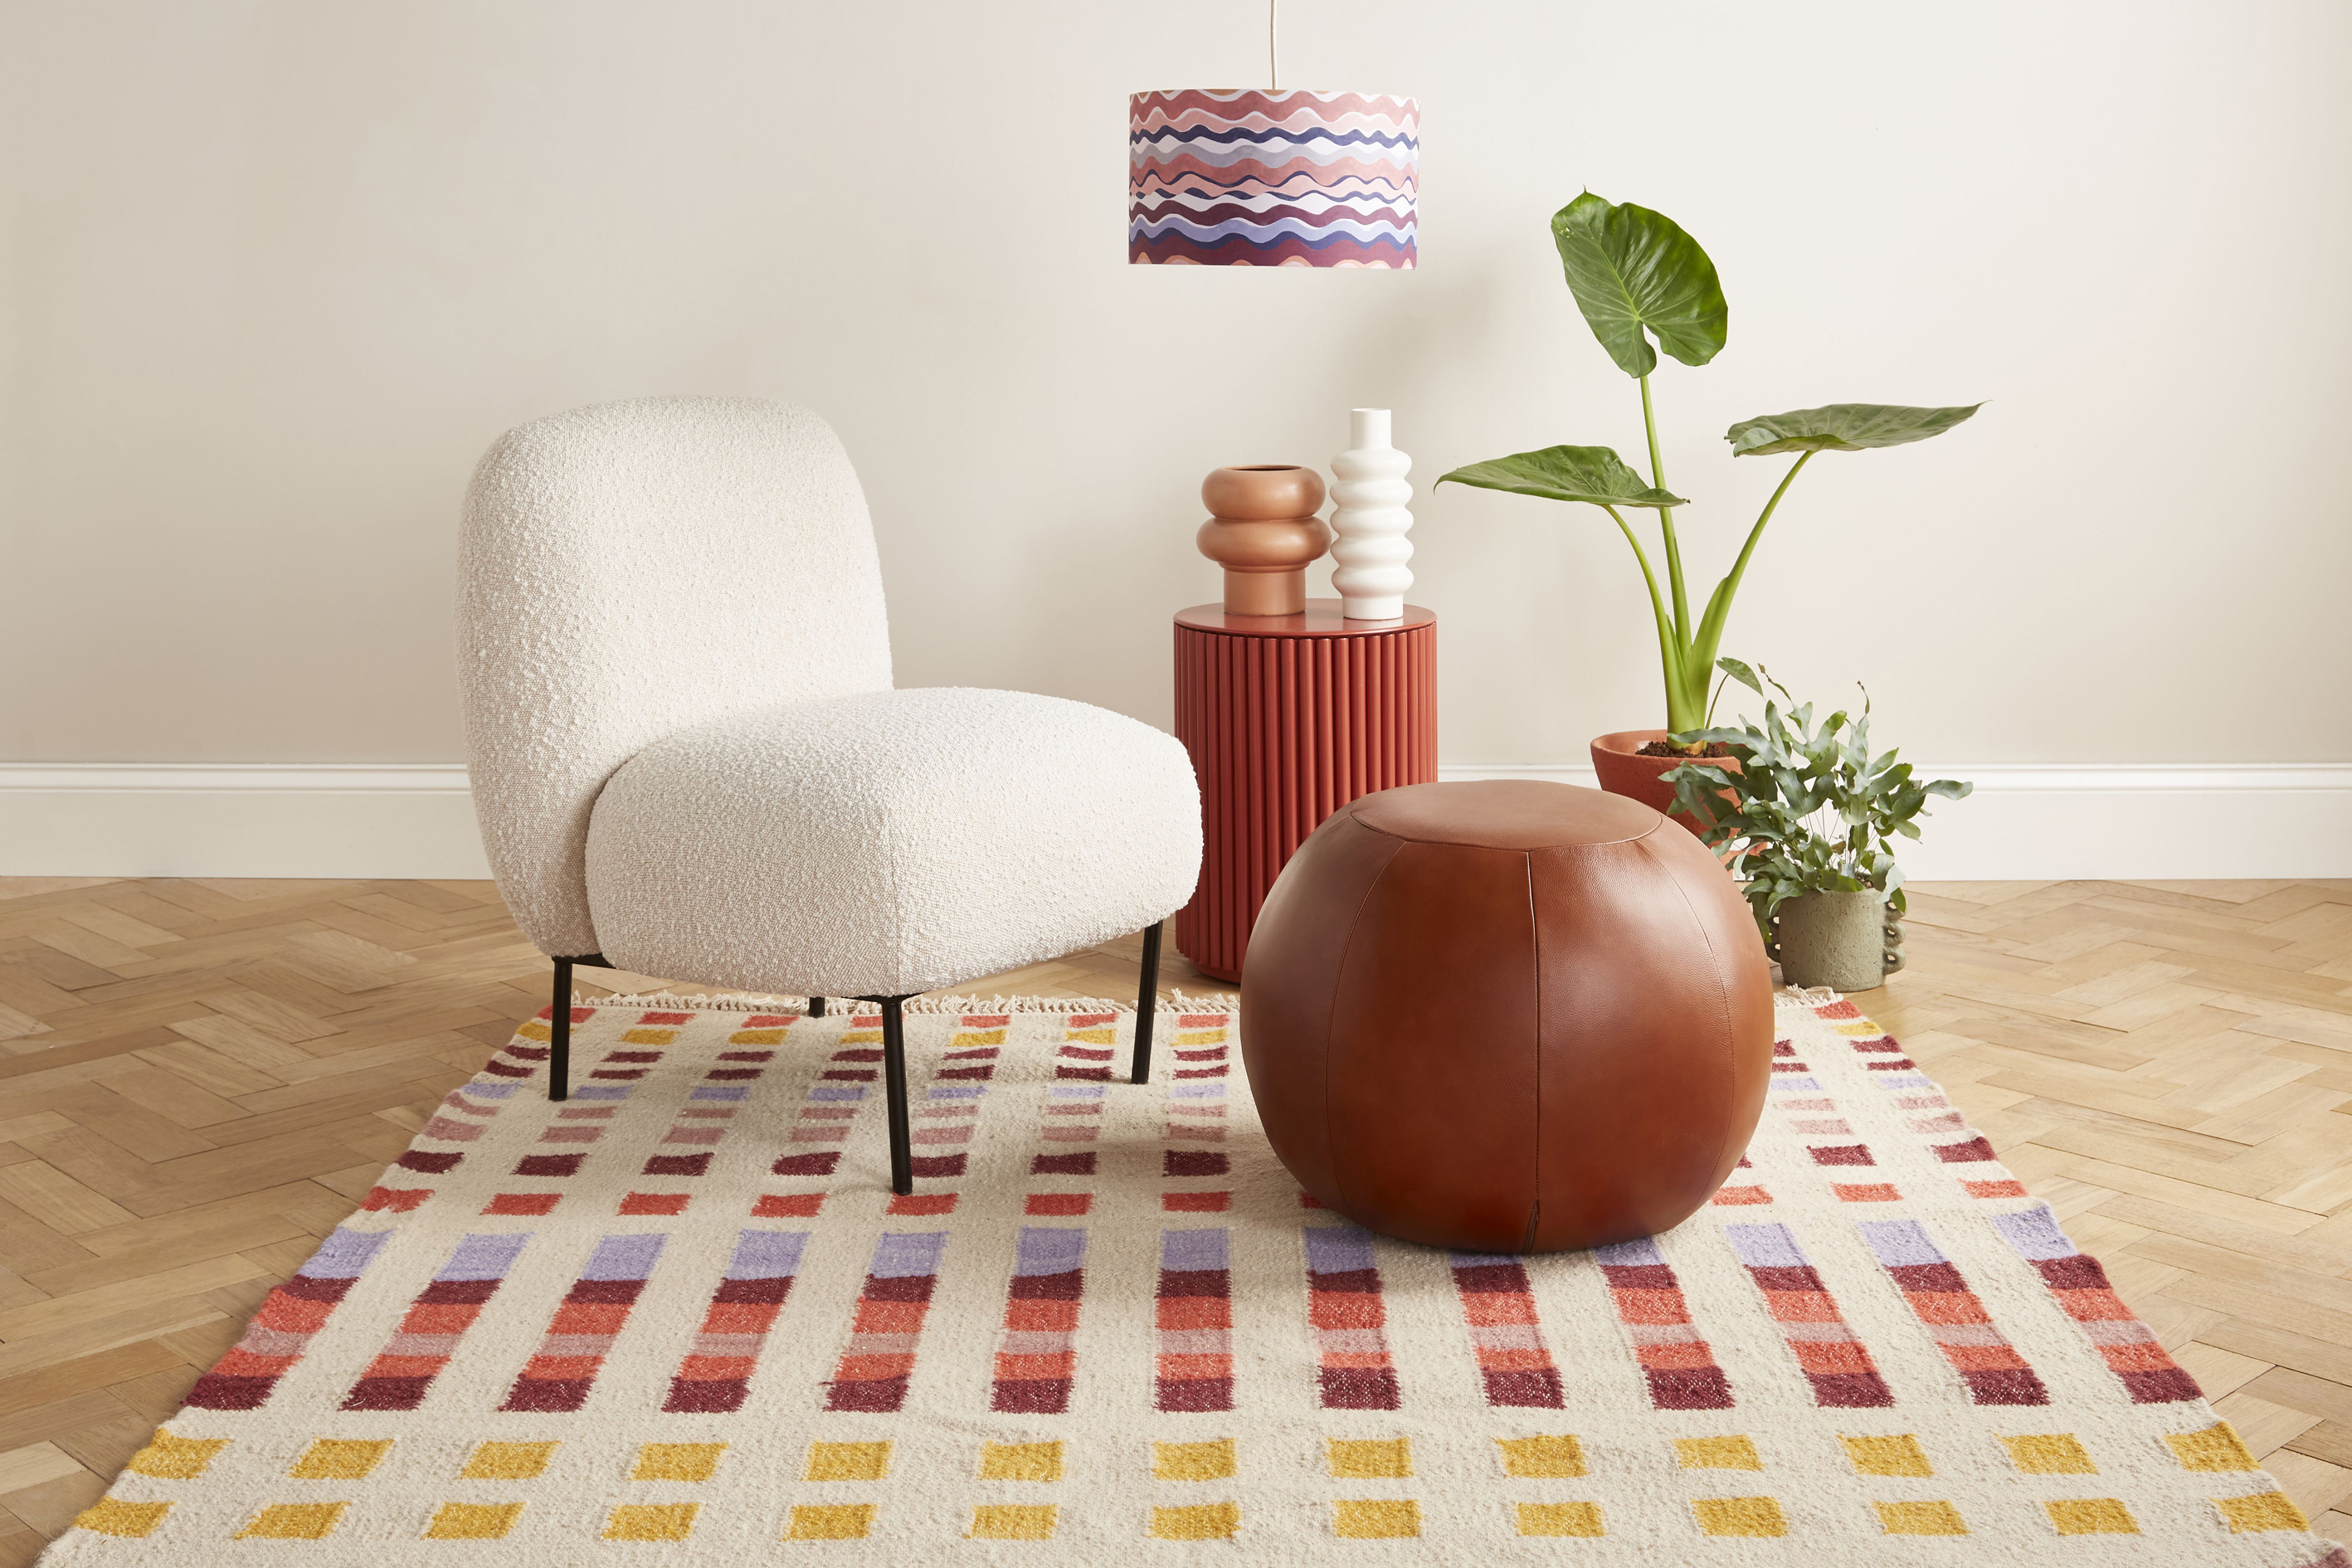 Henry Holland collection of 70s inspired homewares, Freemans